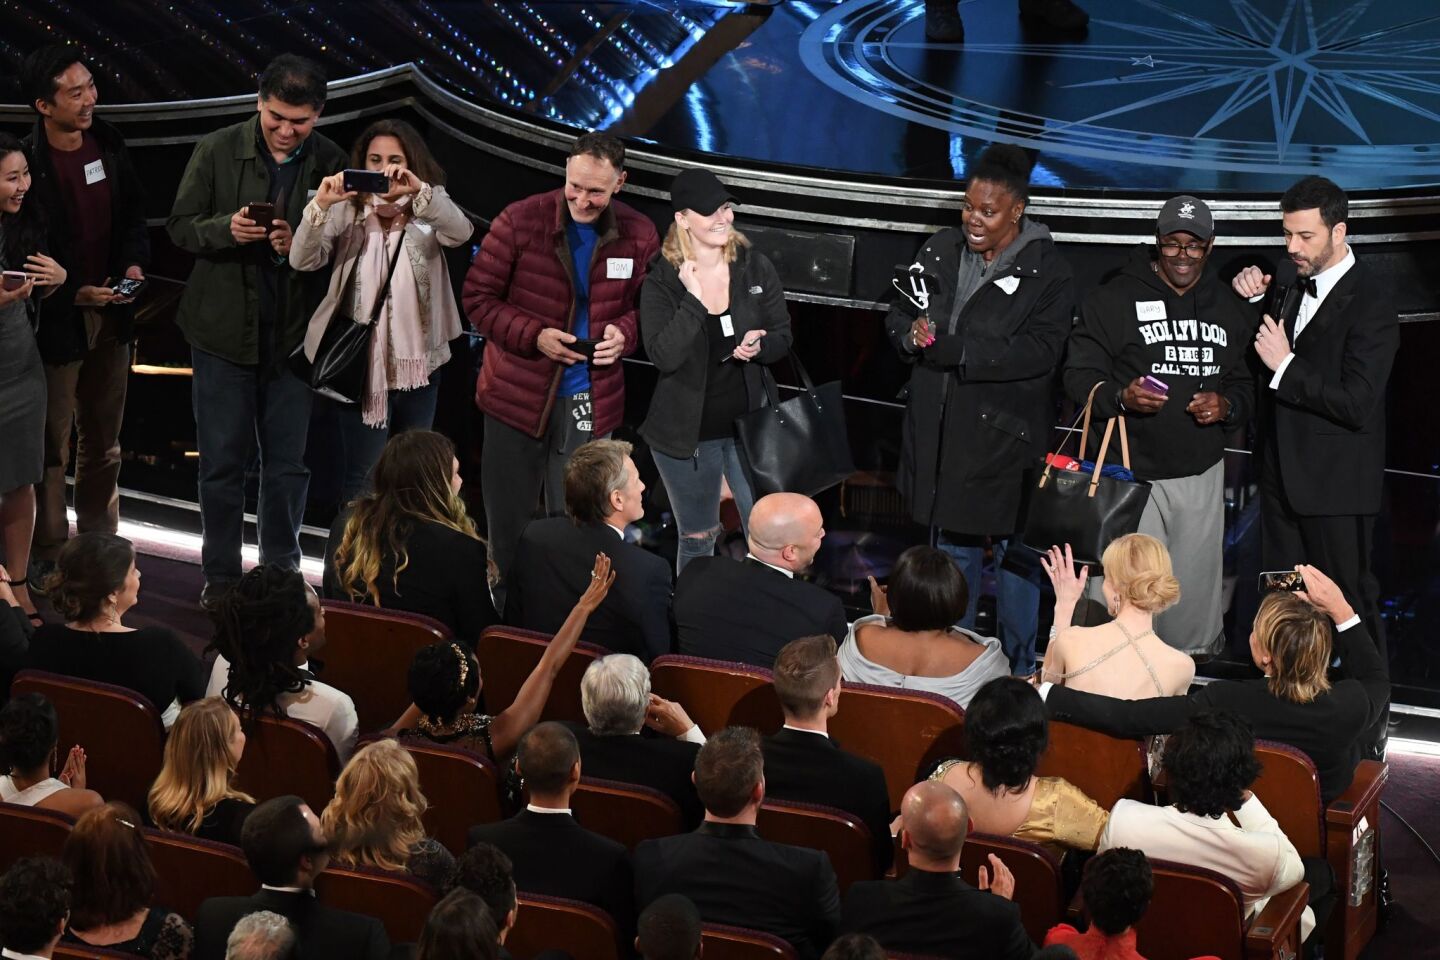 Surprised tourists brought to the Oscars chat with celebrities in the front row.